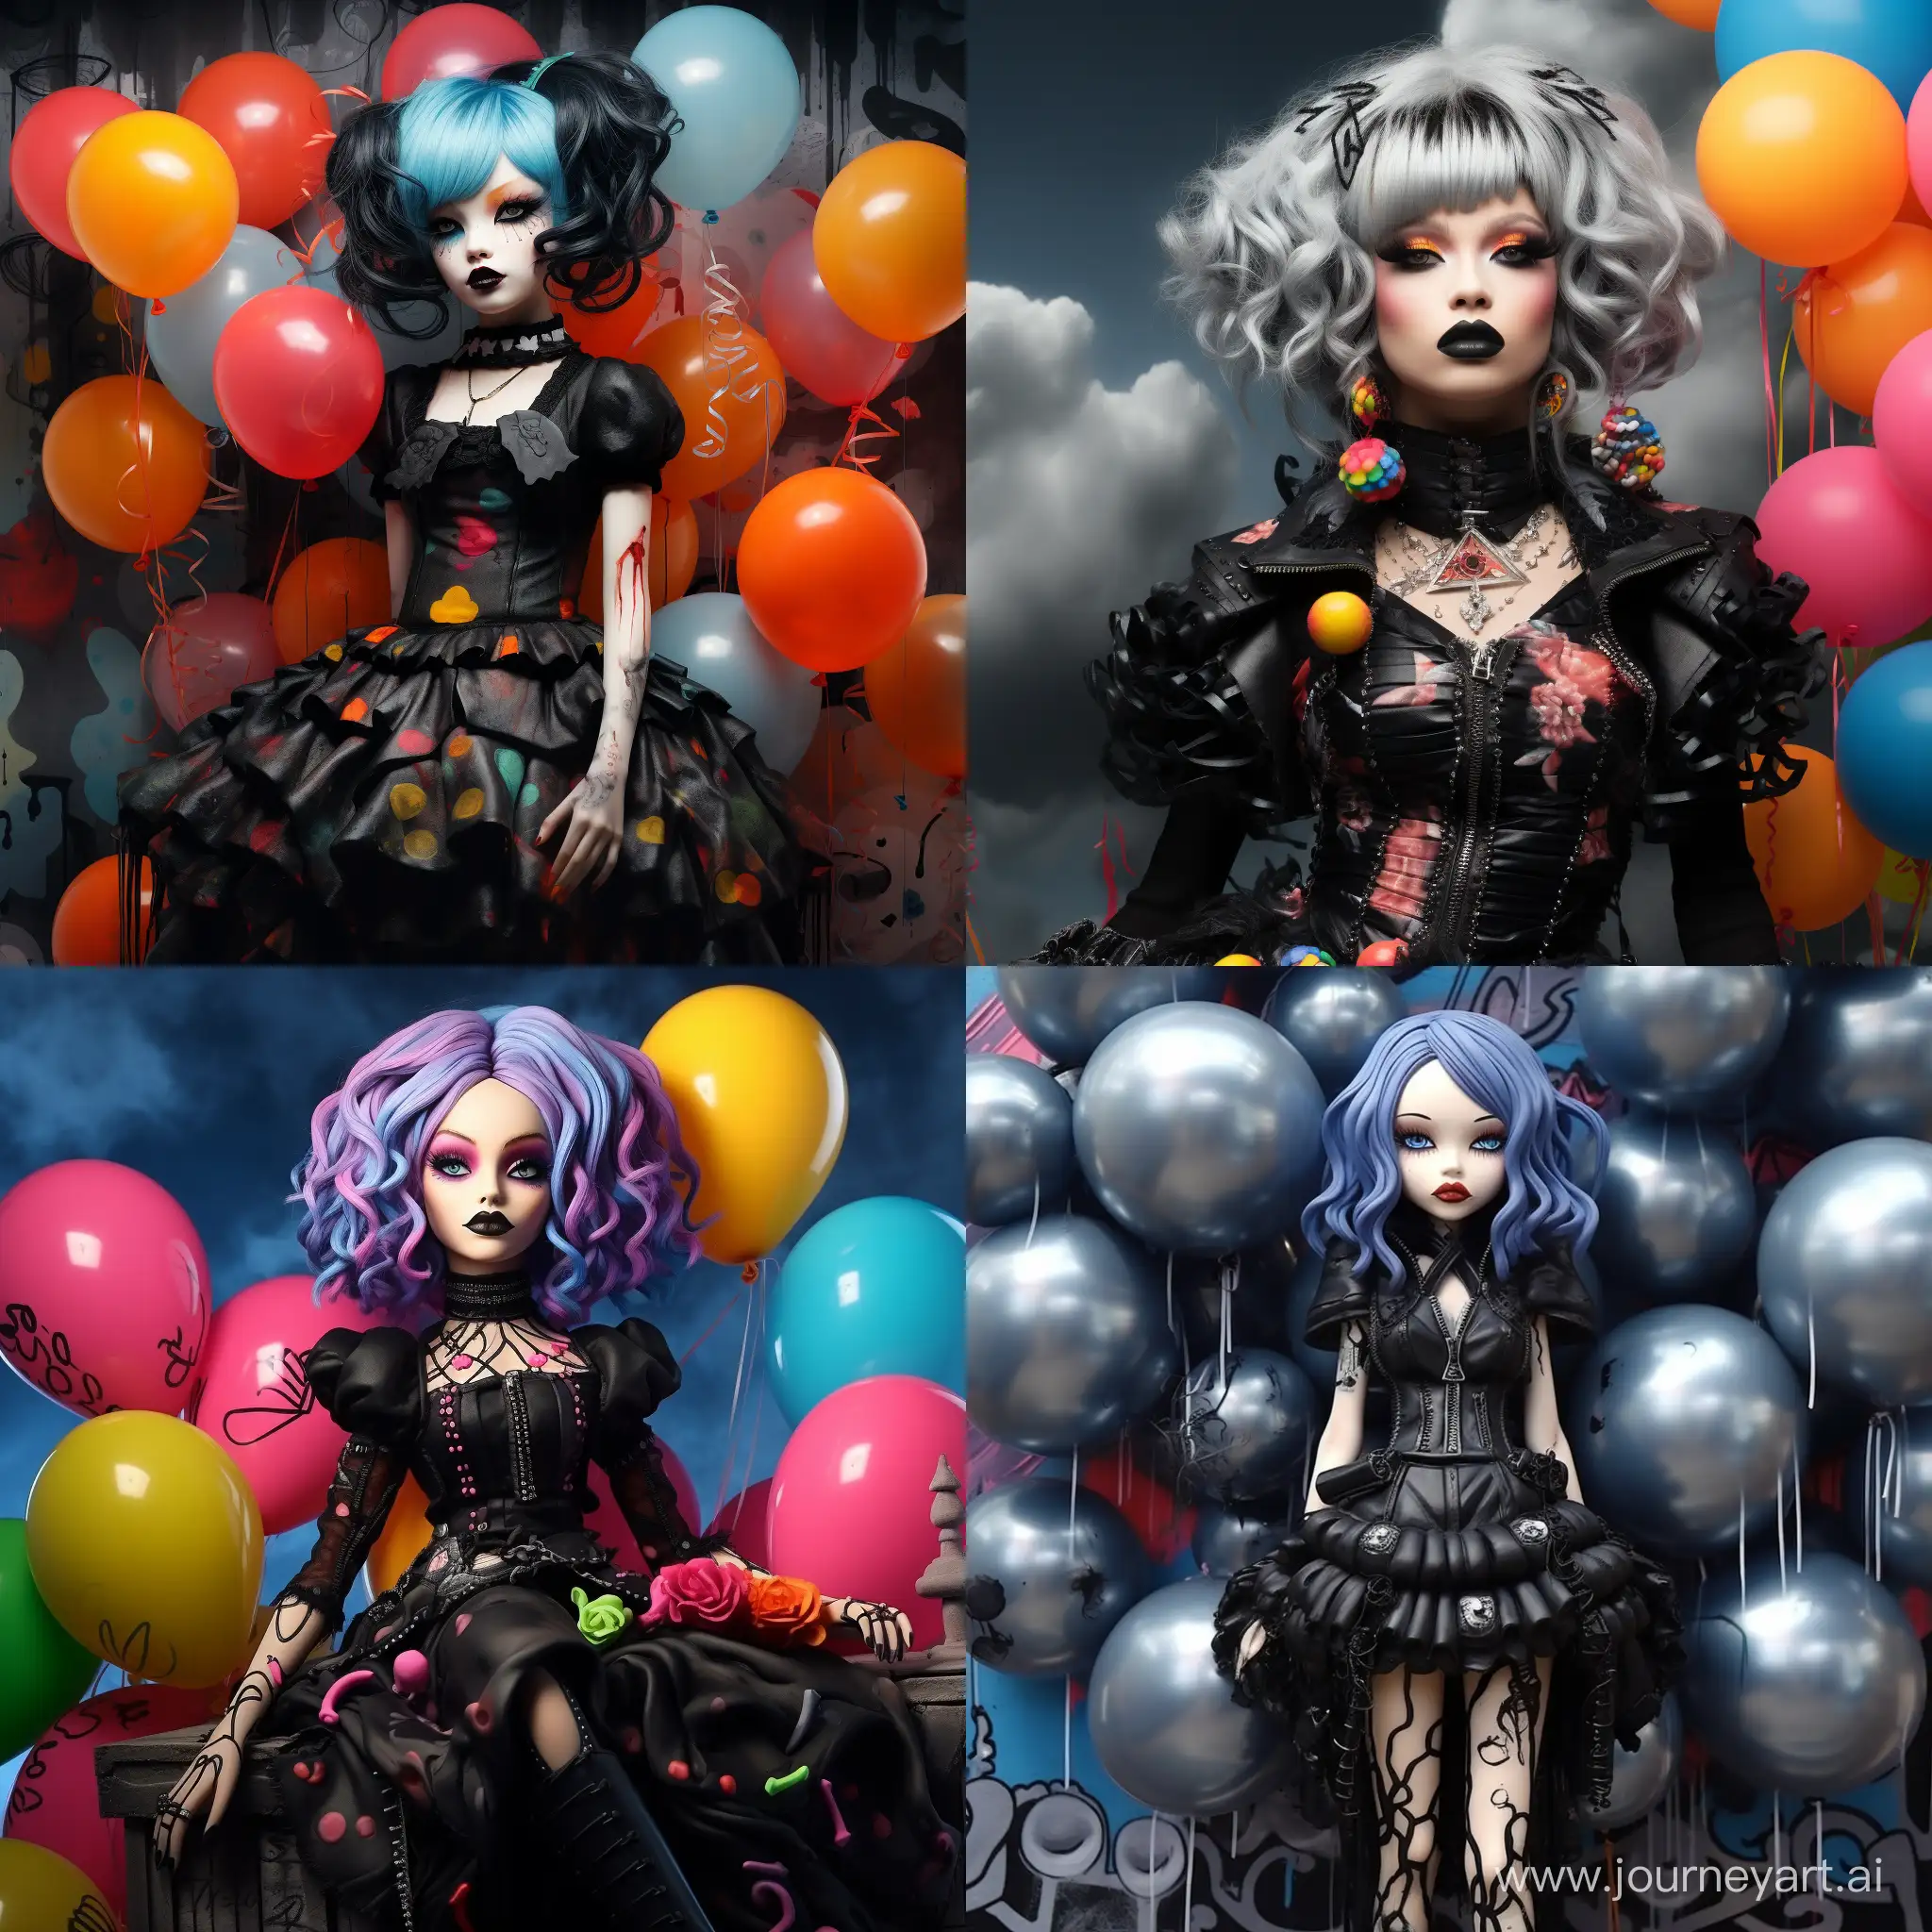 Gothic-Fashion-Doll-BJD-Illustration-with-Bright-Balloons-and-Neon-Graffiti